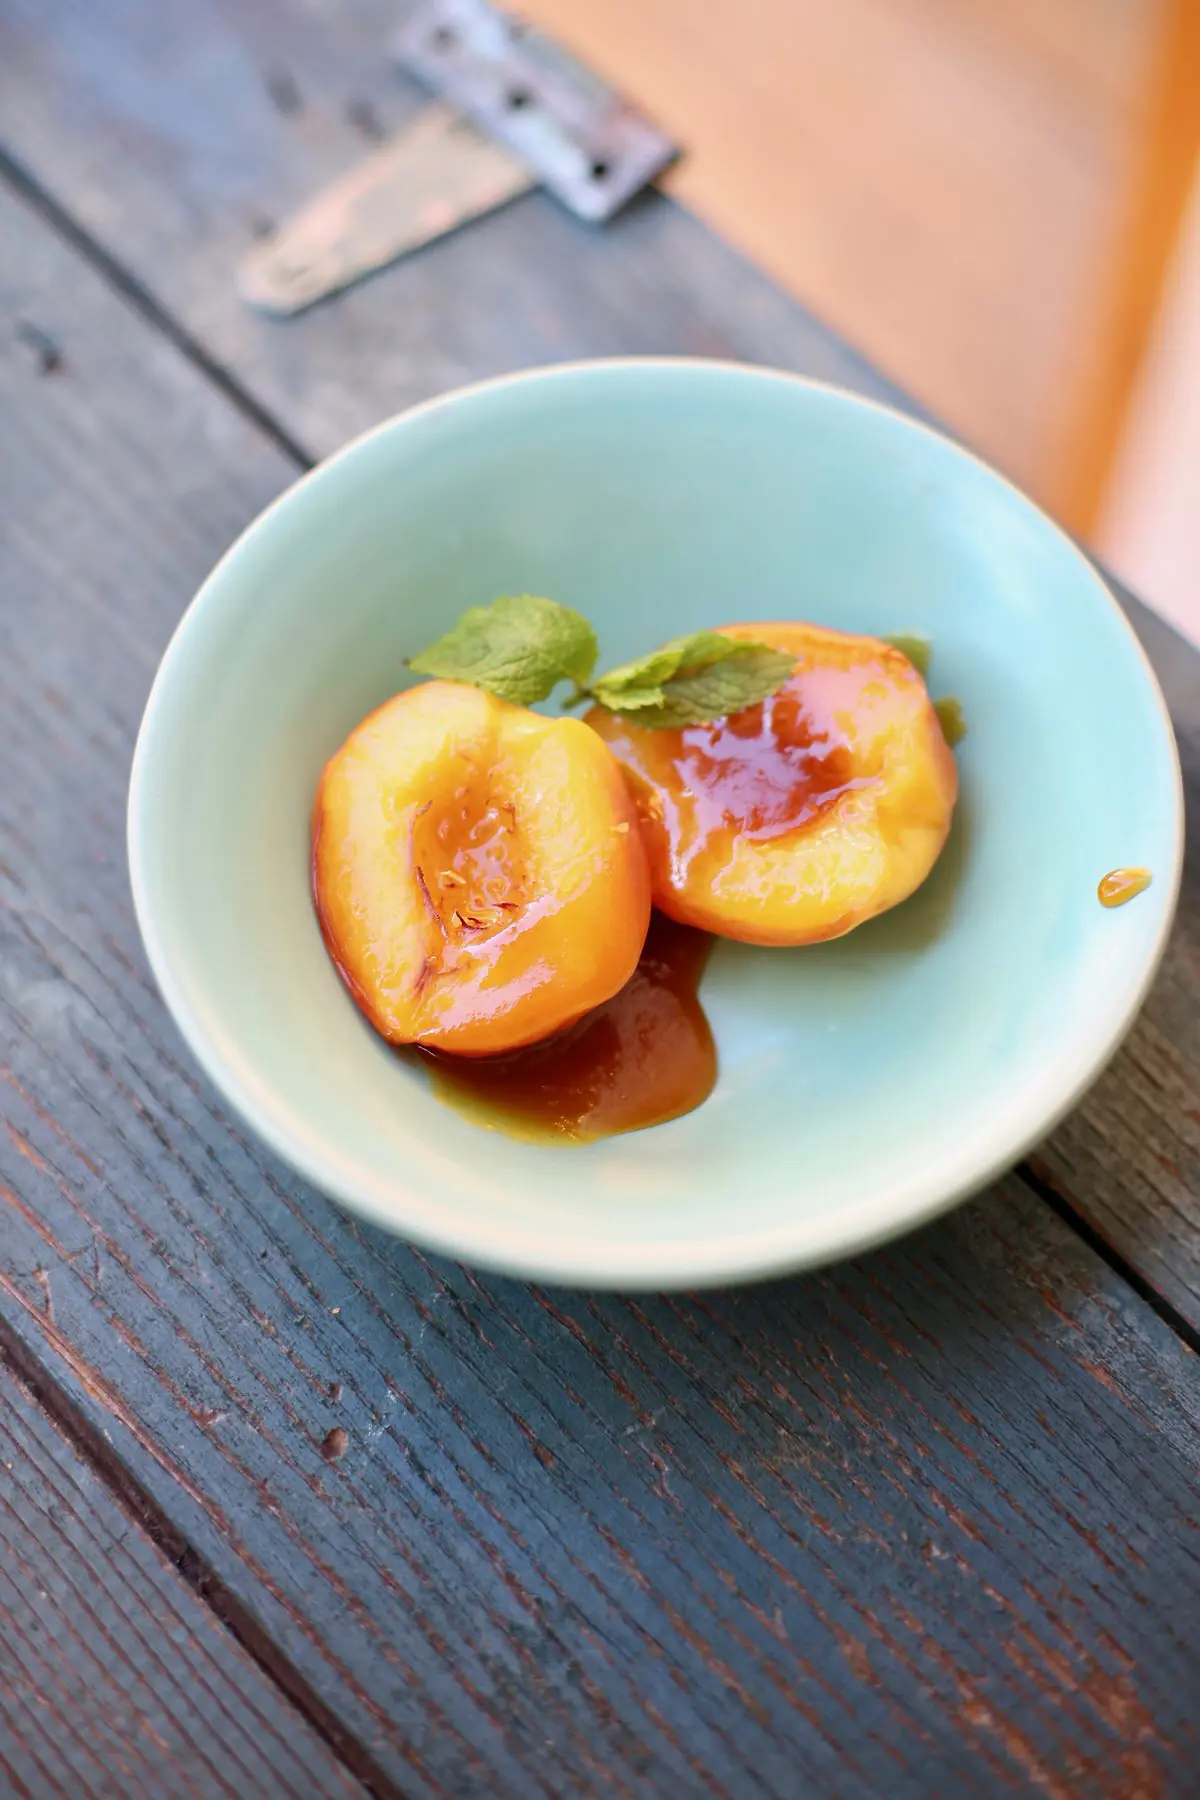 Roasted nectarines in a blue bowl on a blue wooden table